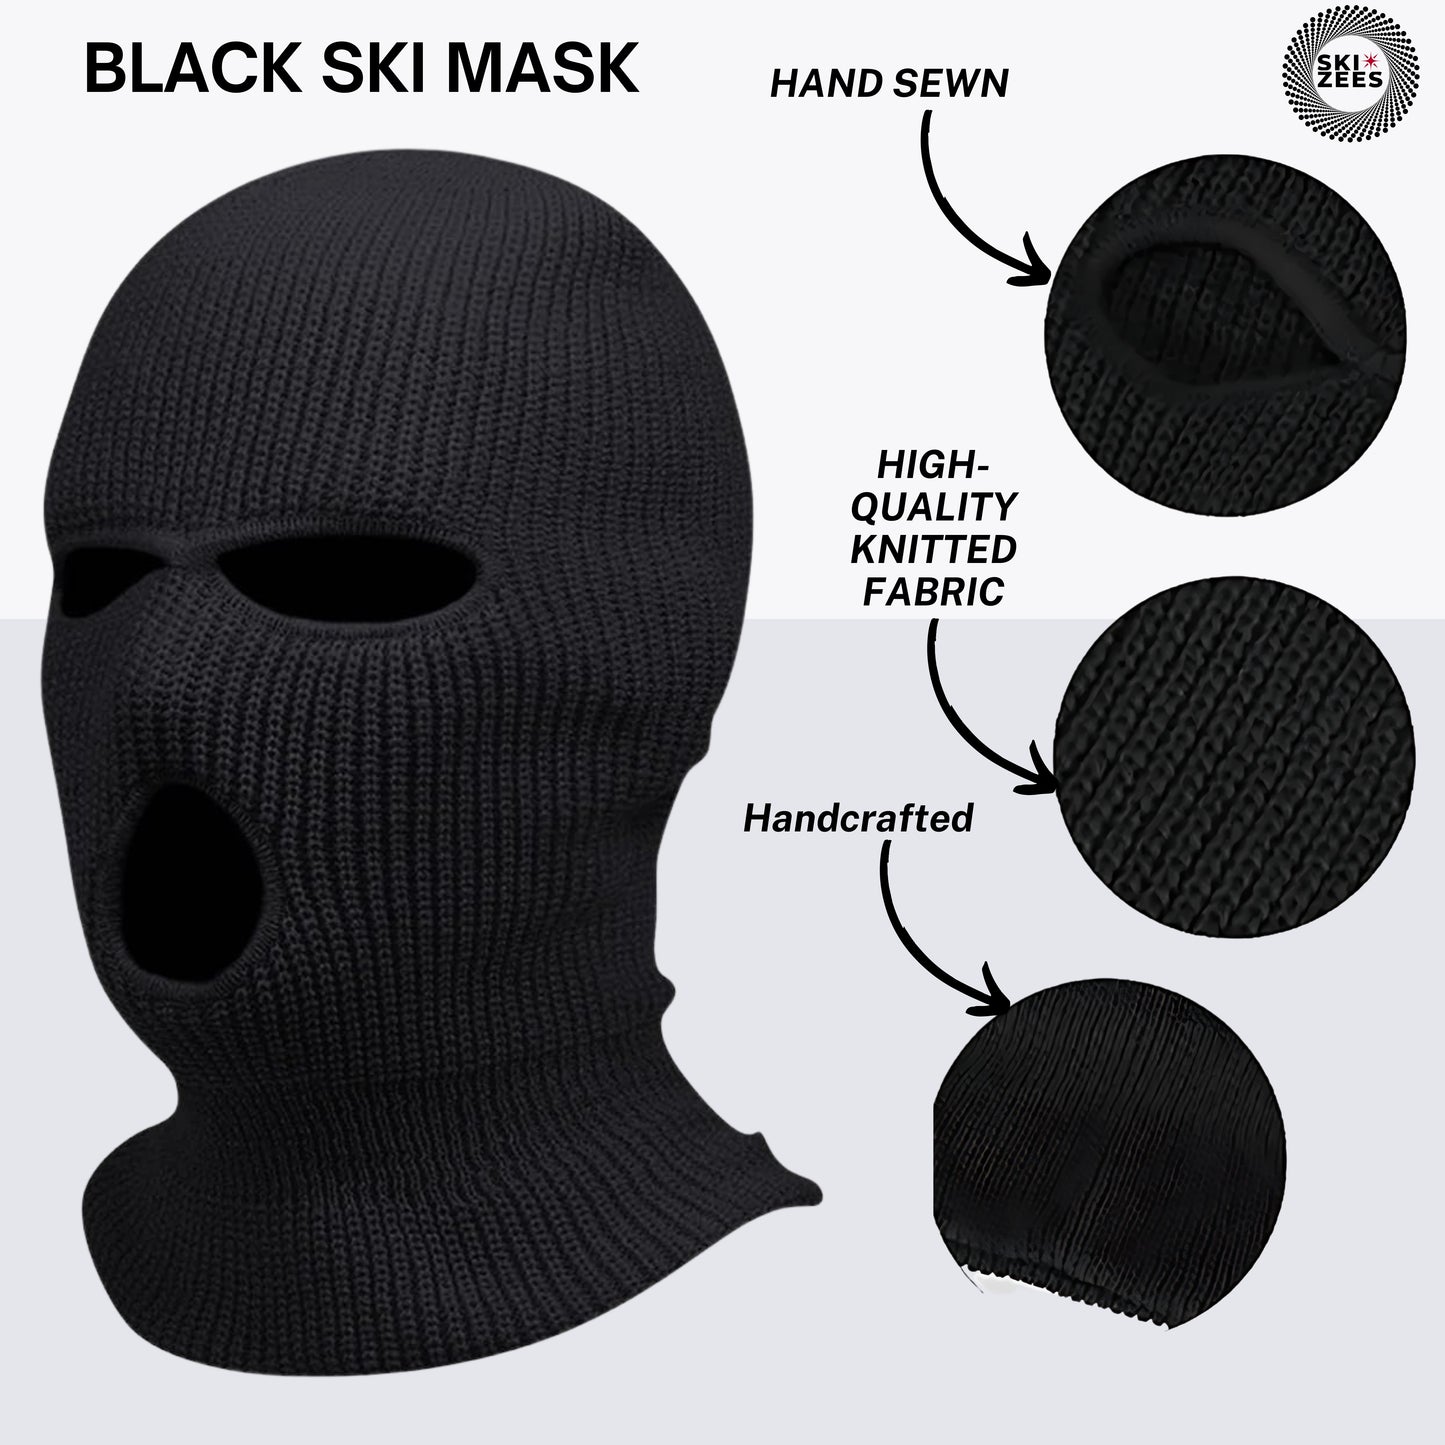 Black ski mask, hands-on high-quality knitted fabric handcrafted